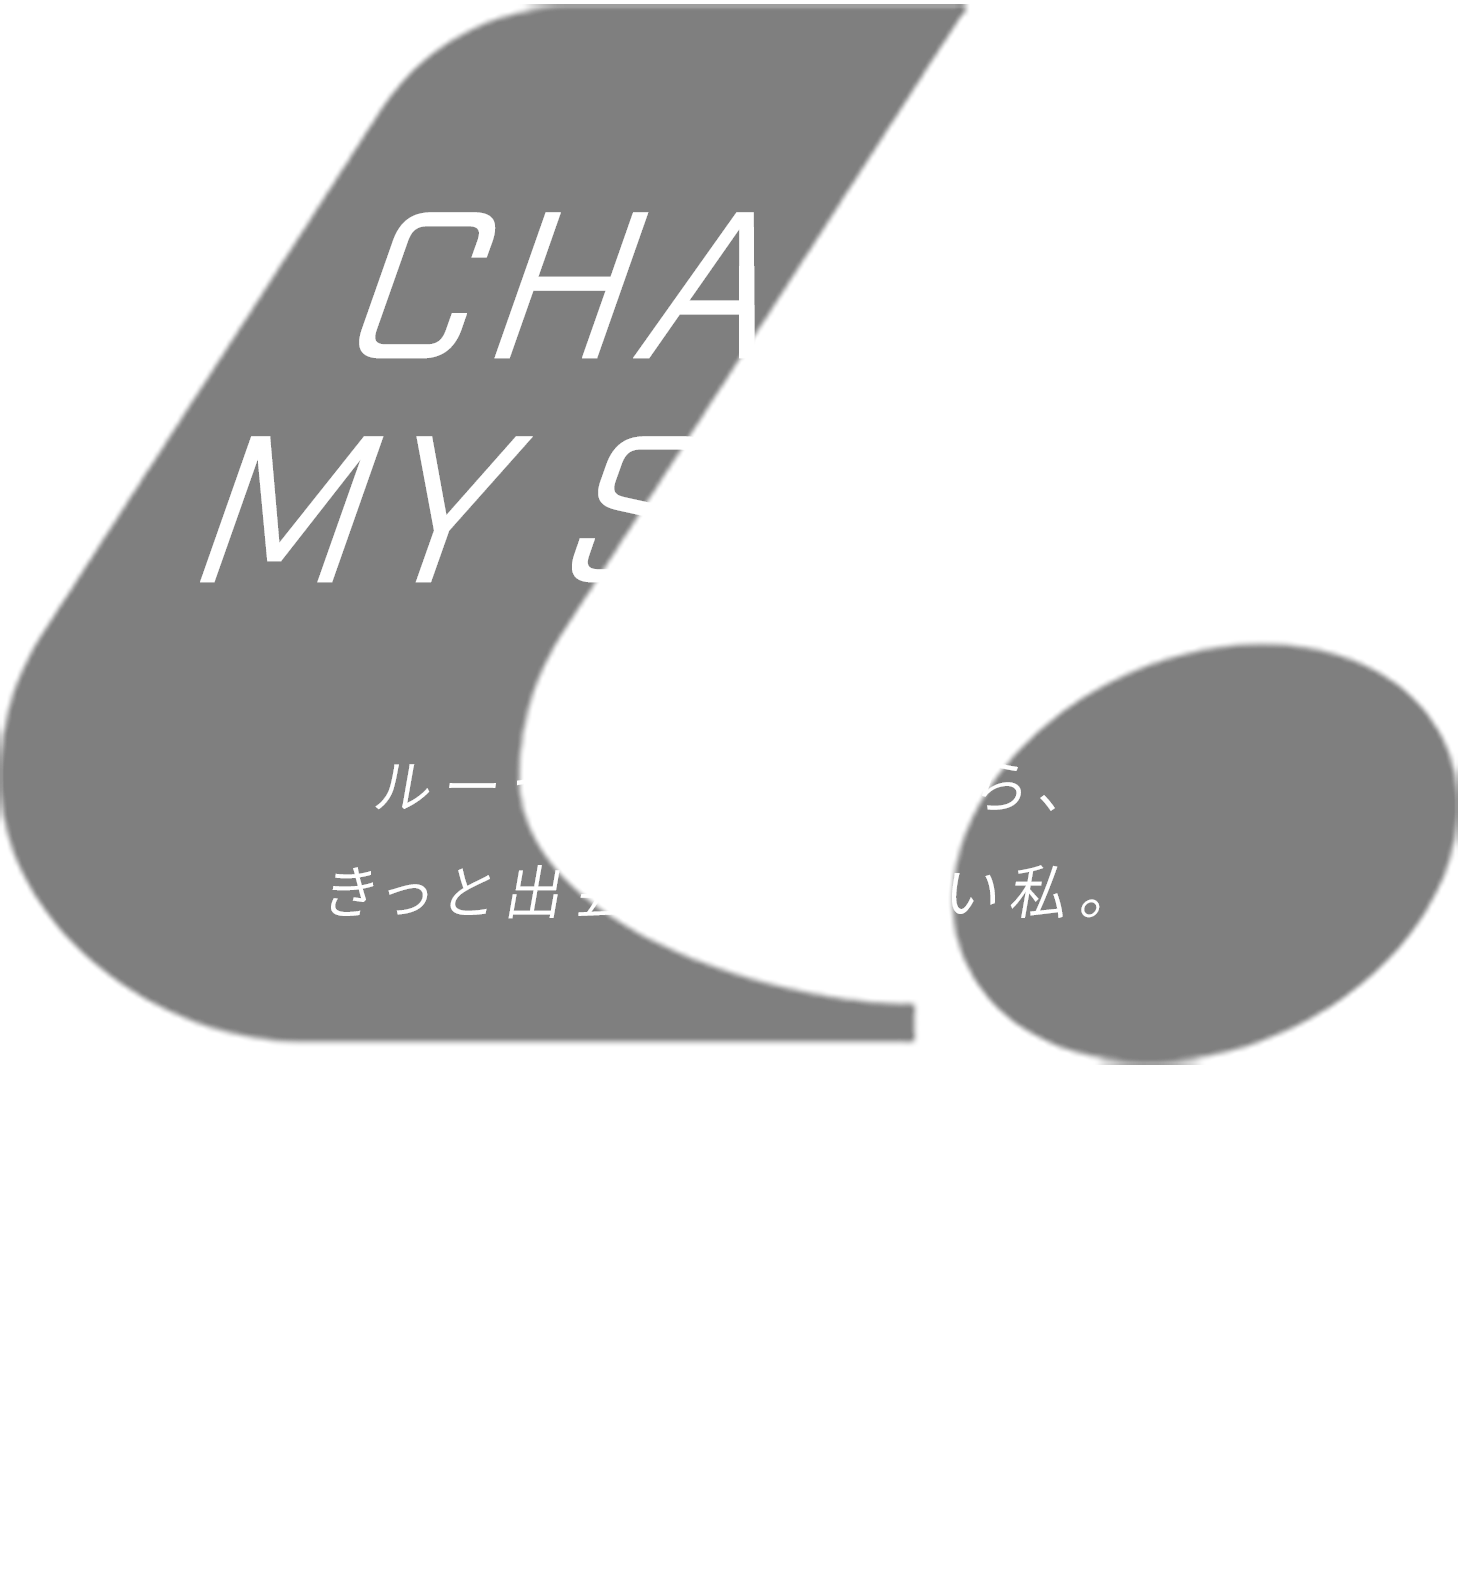 CAHCGE YOUR STYLE ルーセントが一緒ならきっと出会える、新しい私。